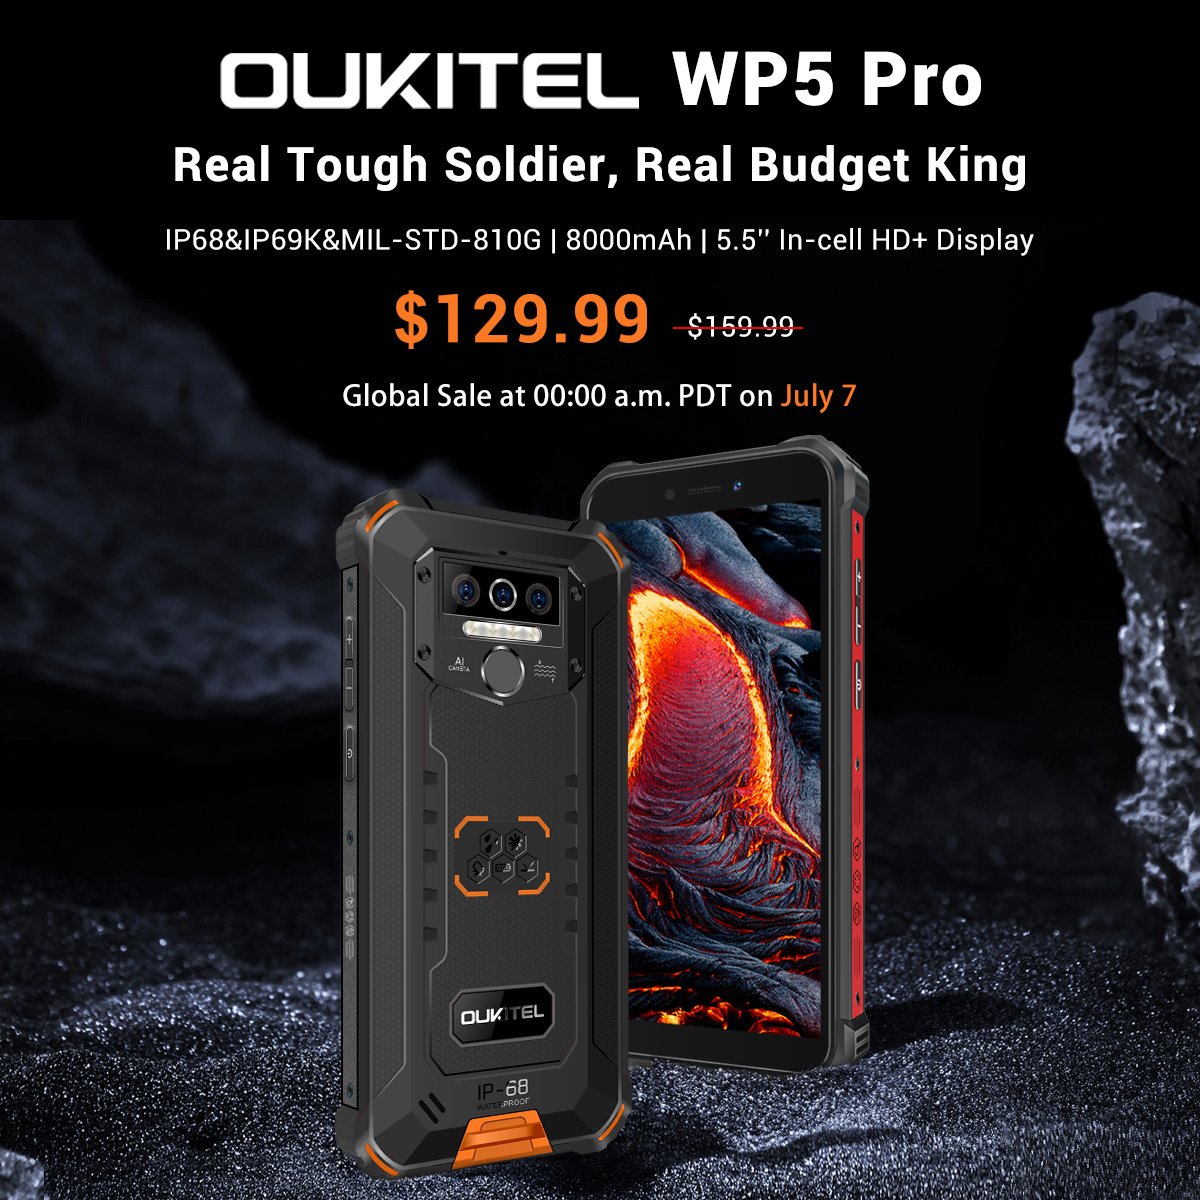 Oukitel WP5 Pro rugged smartphone launched with a 8000mAh battery, Helio A25 SoC for $129.99